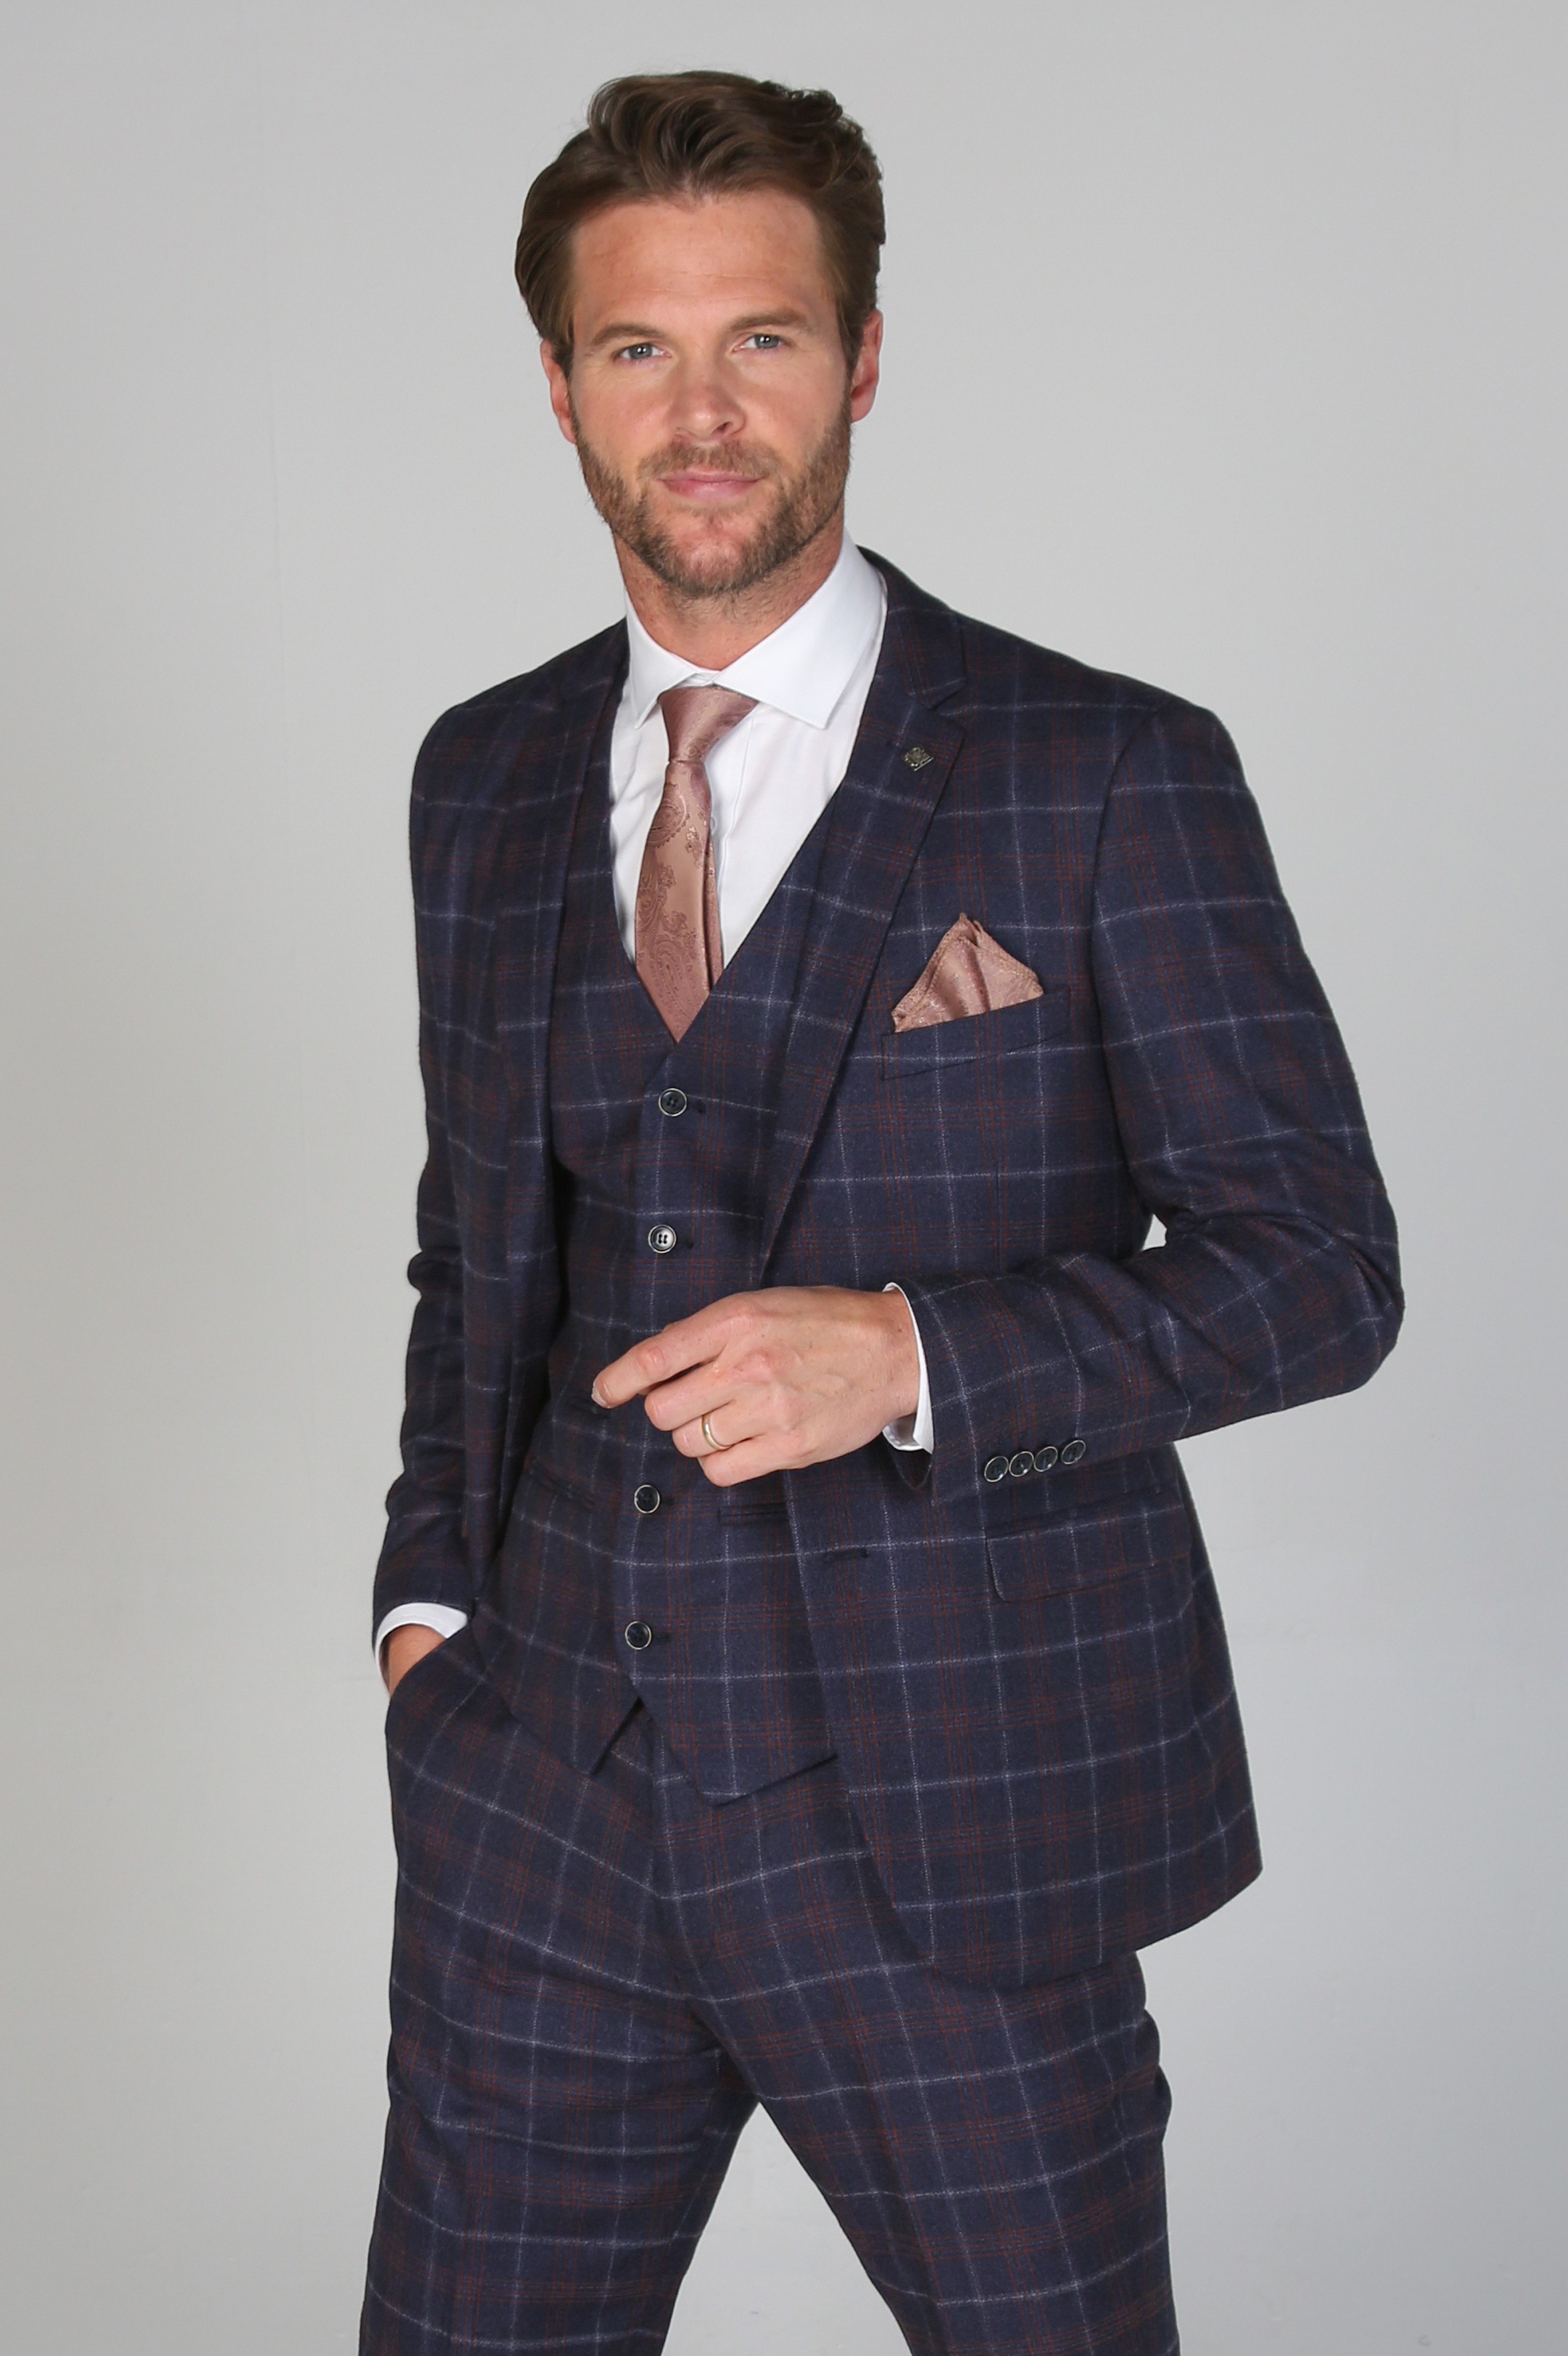 Men's Tailored Fit Retro Check Suit - KENNETH